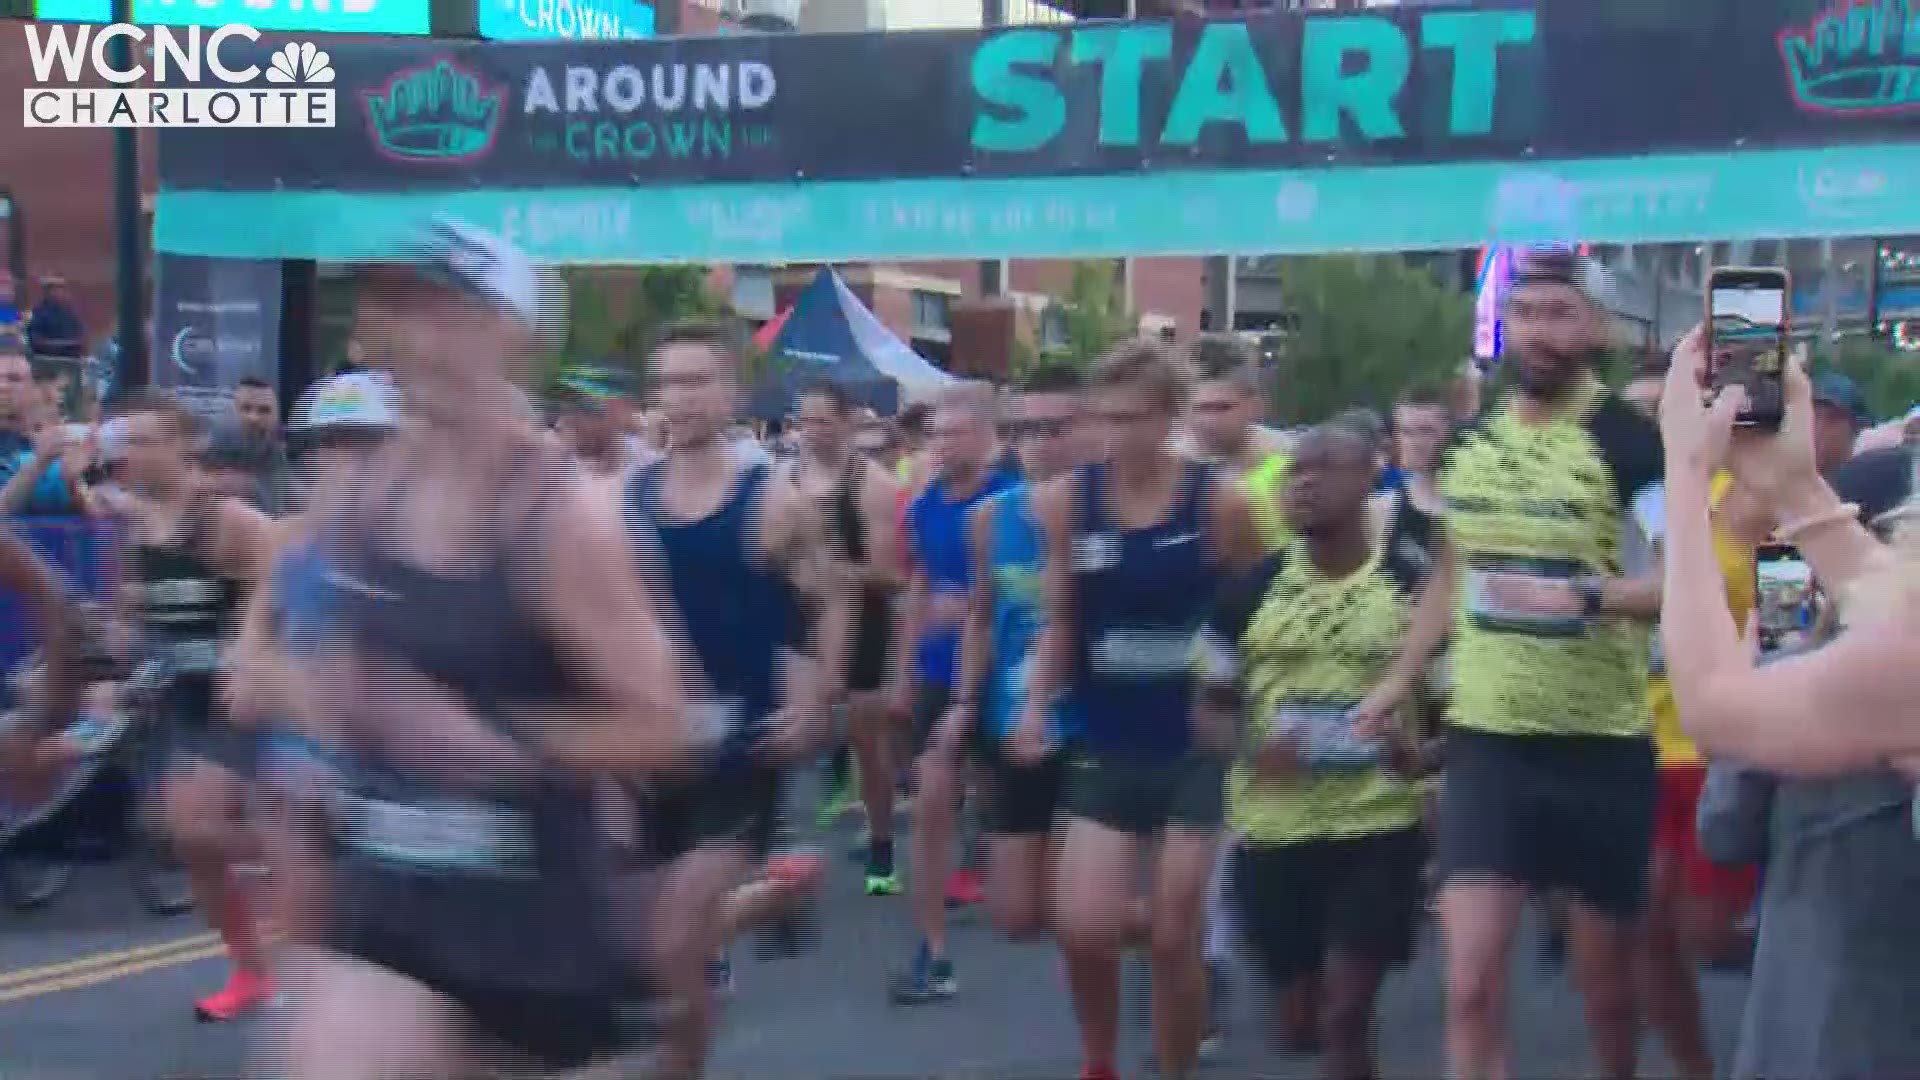 The 10K took place Sunday morning in uptown Charlotte -- including on part of Interstate 277. It kicked off at 7:04 a.m.